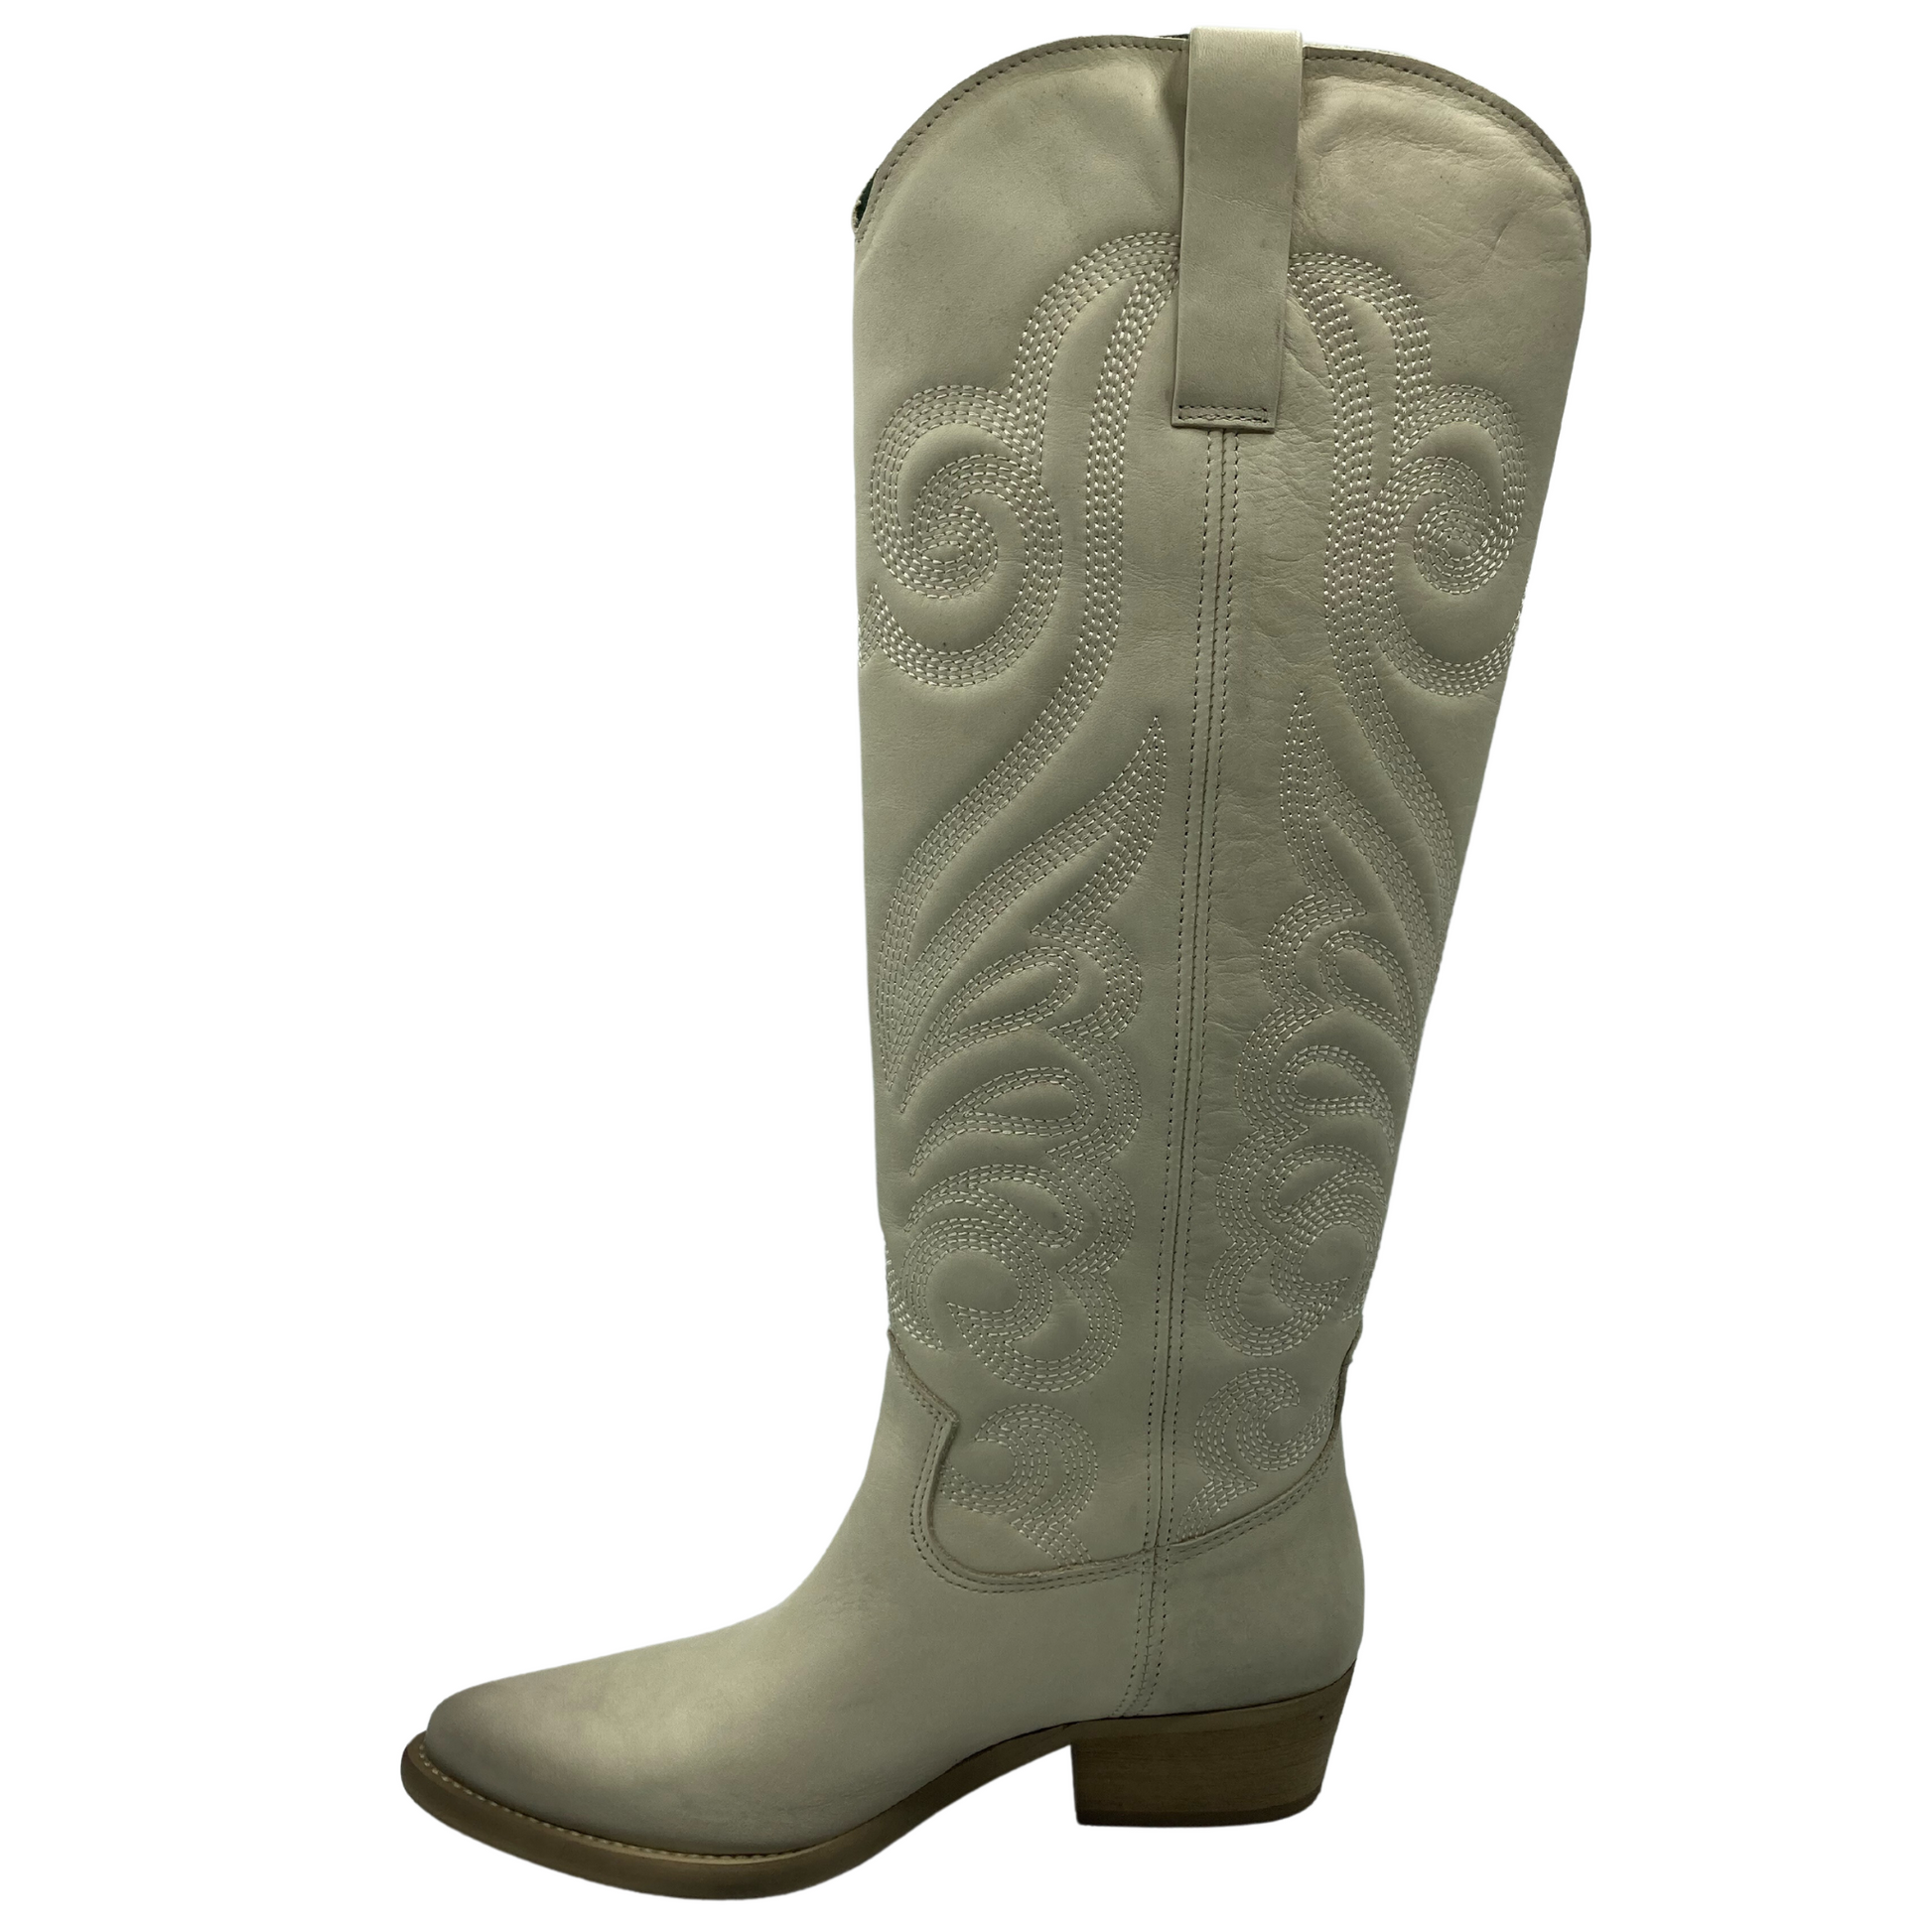 Left facing view of tall, off-white, leather cowboy boot